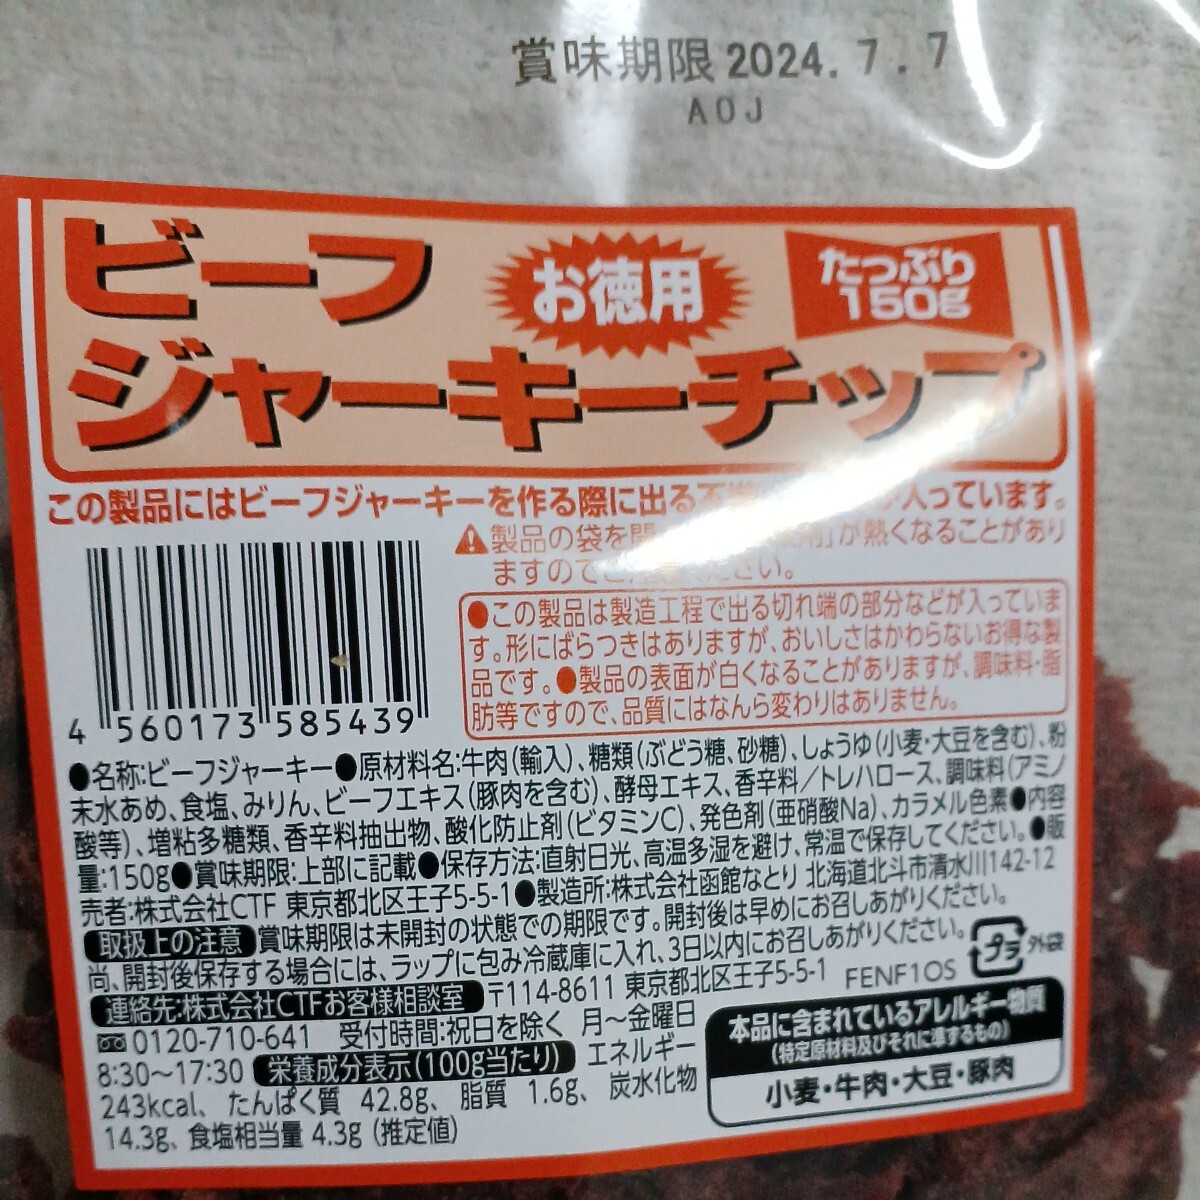  economical 150g...* beef jerky limited amount limited time ... peak beef jerky snack bite Event 